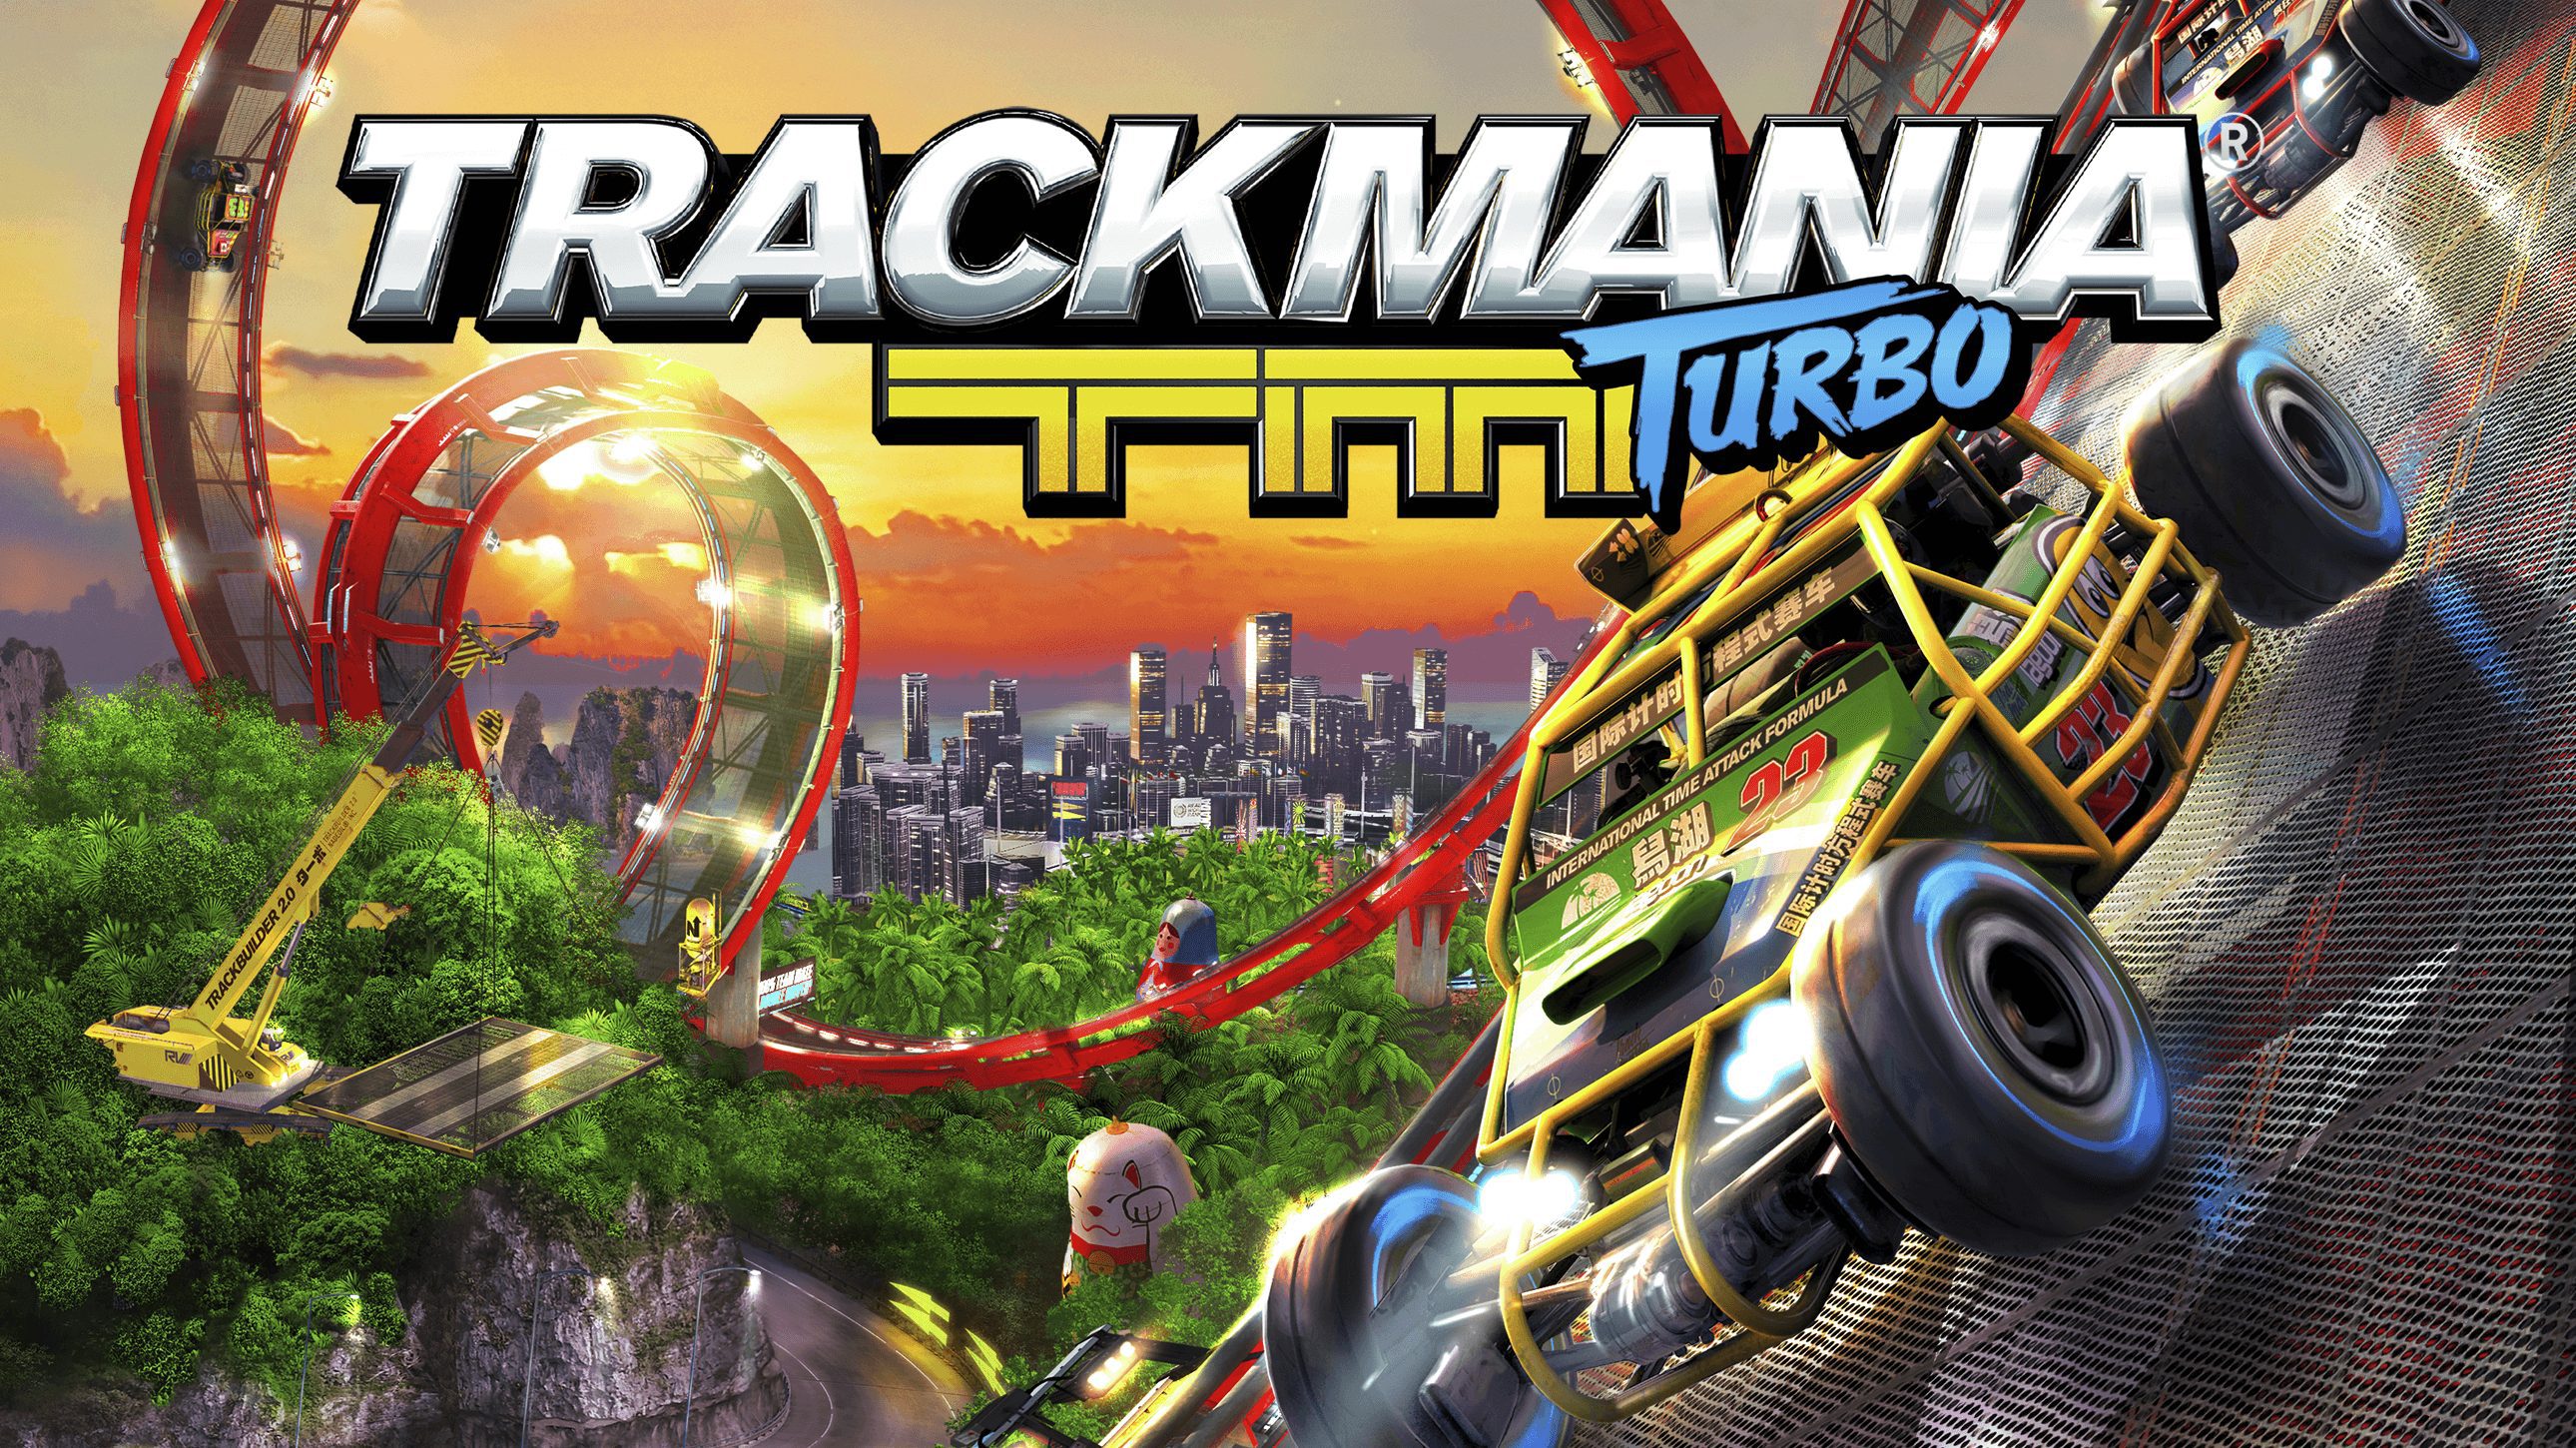 TrackMania Turbo Game Full Version Free Download